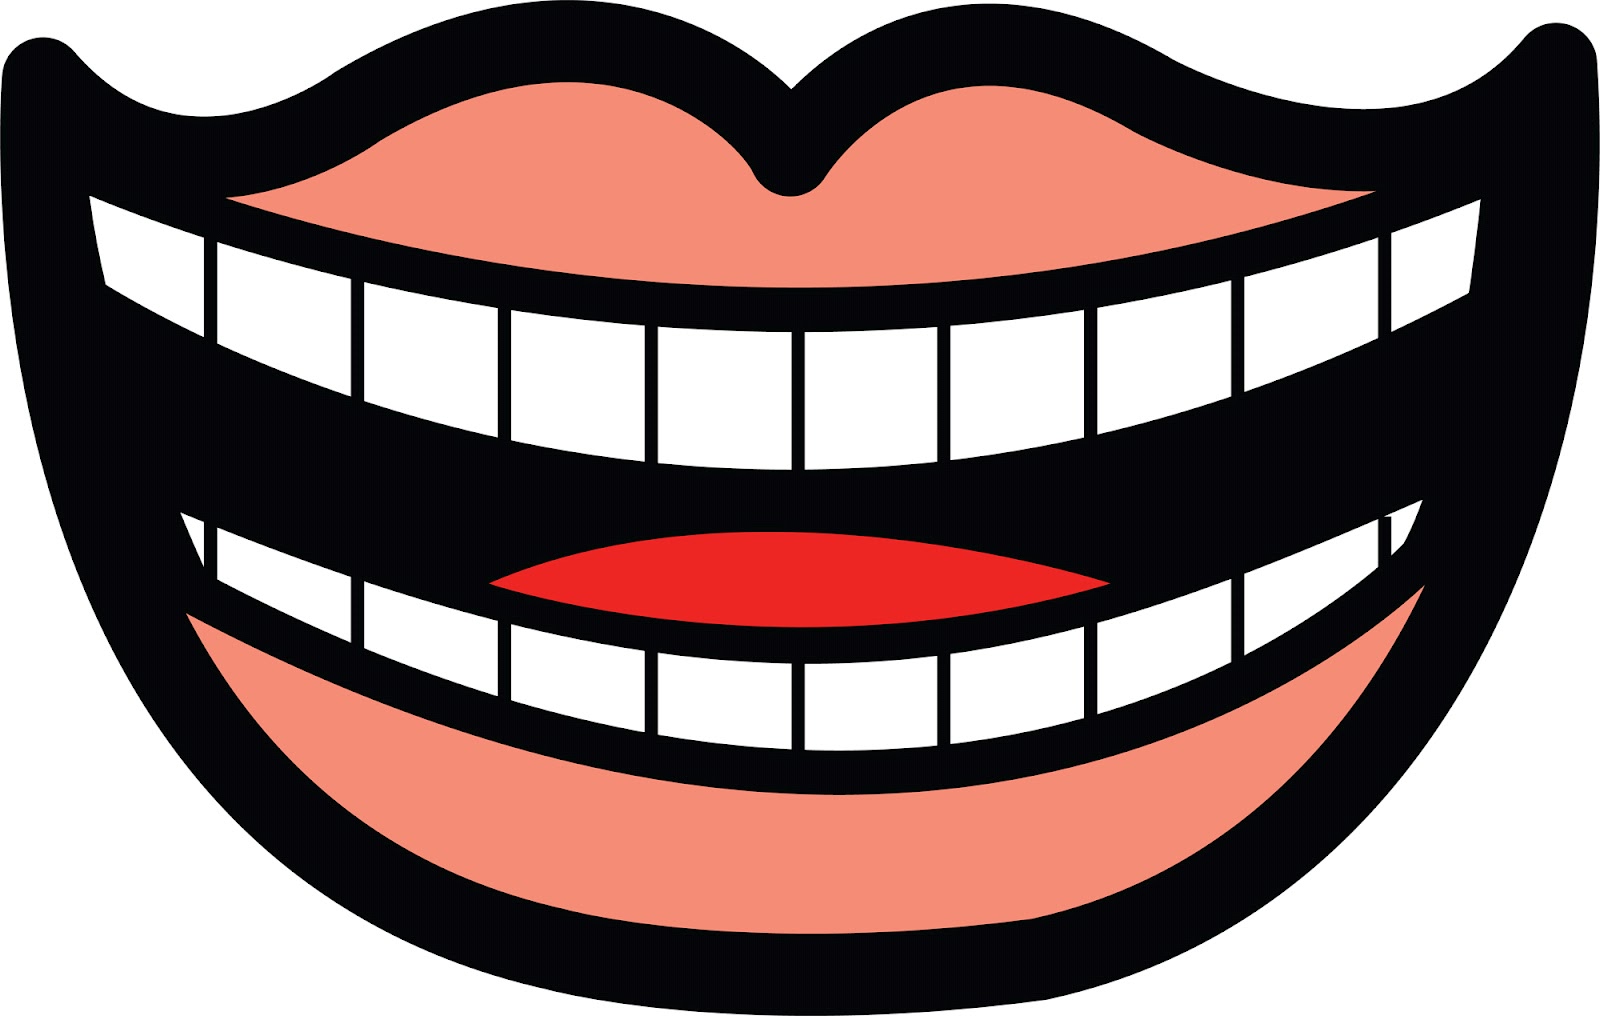 Talking Mouth Animation - ClipArt Best - ClipArt Best